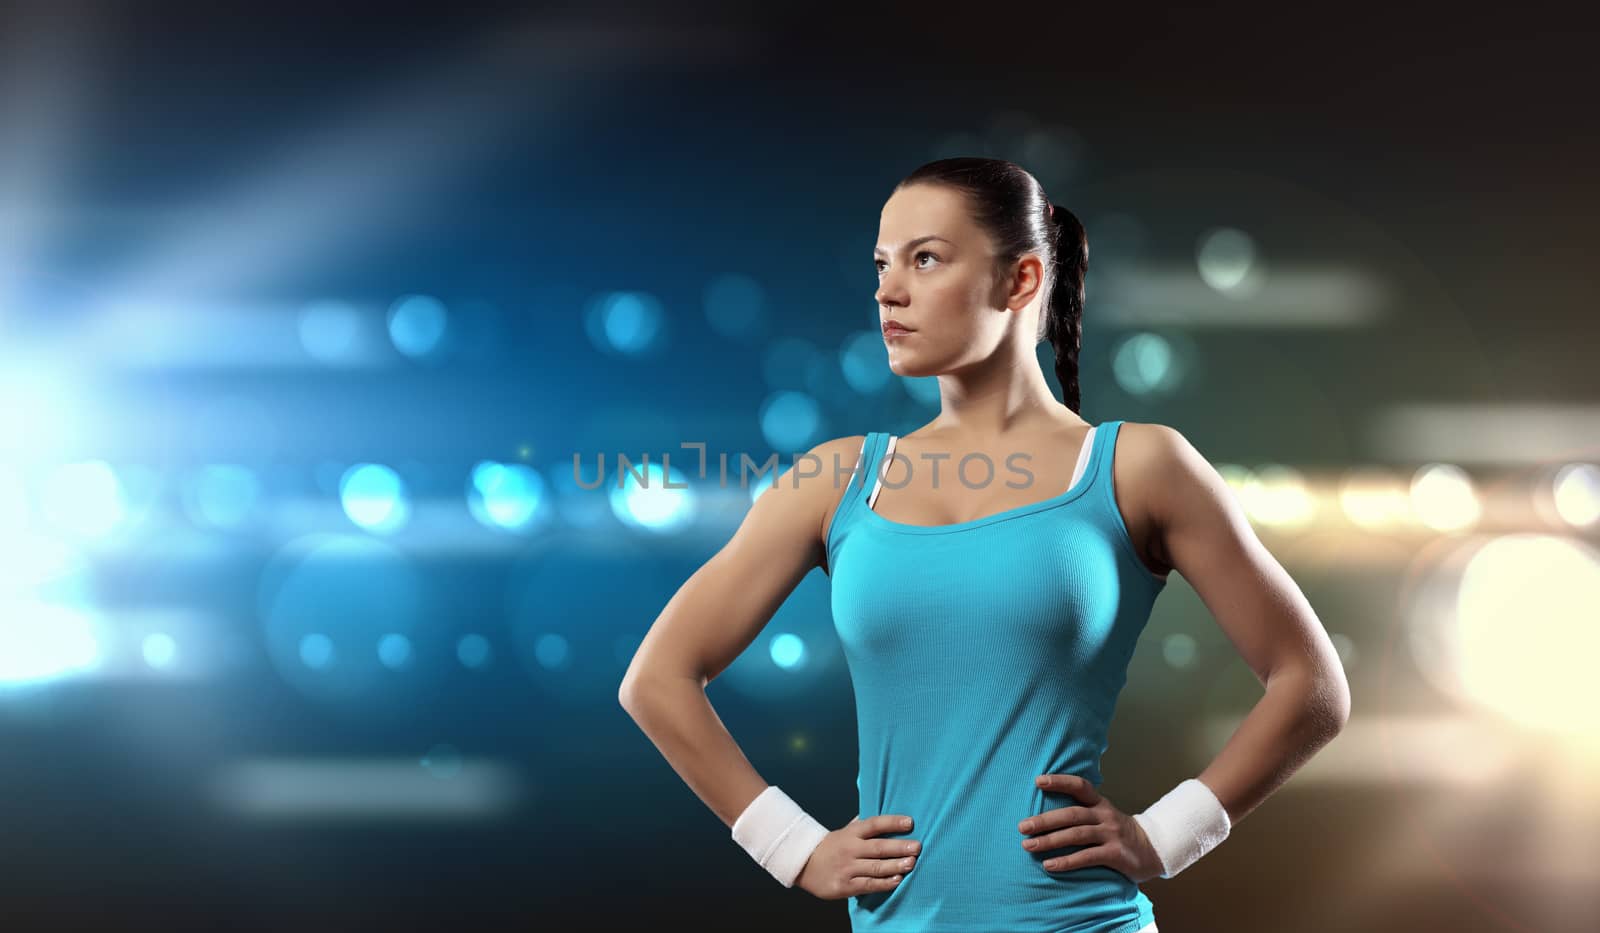 Image of sportswoman standing against lights background